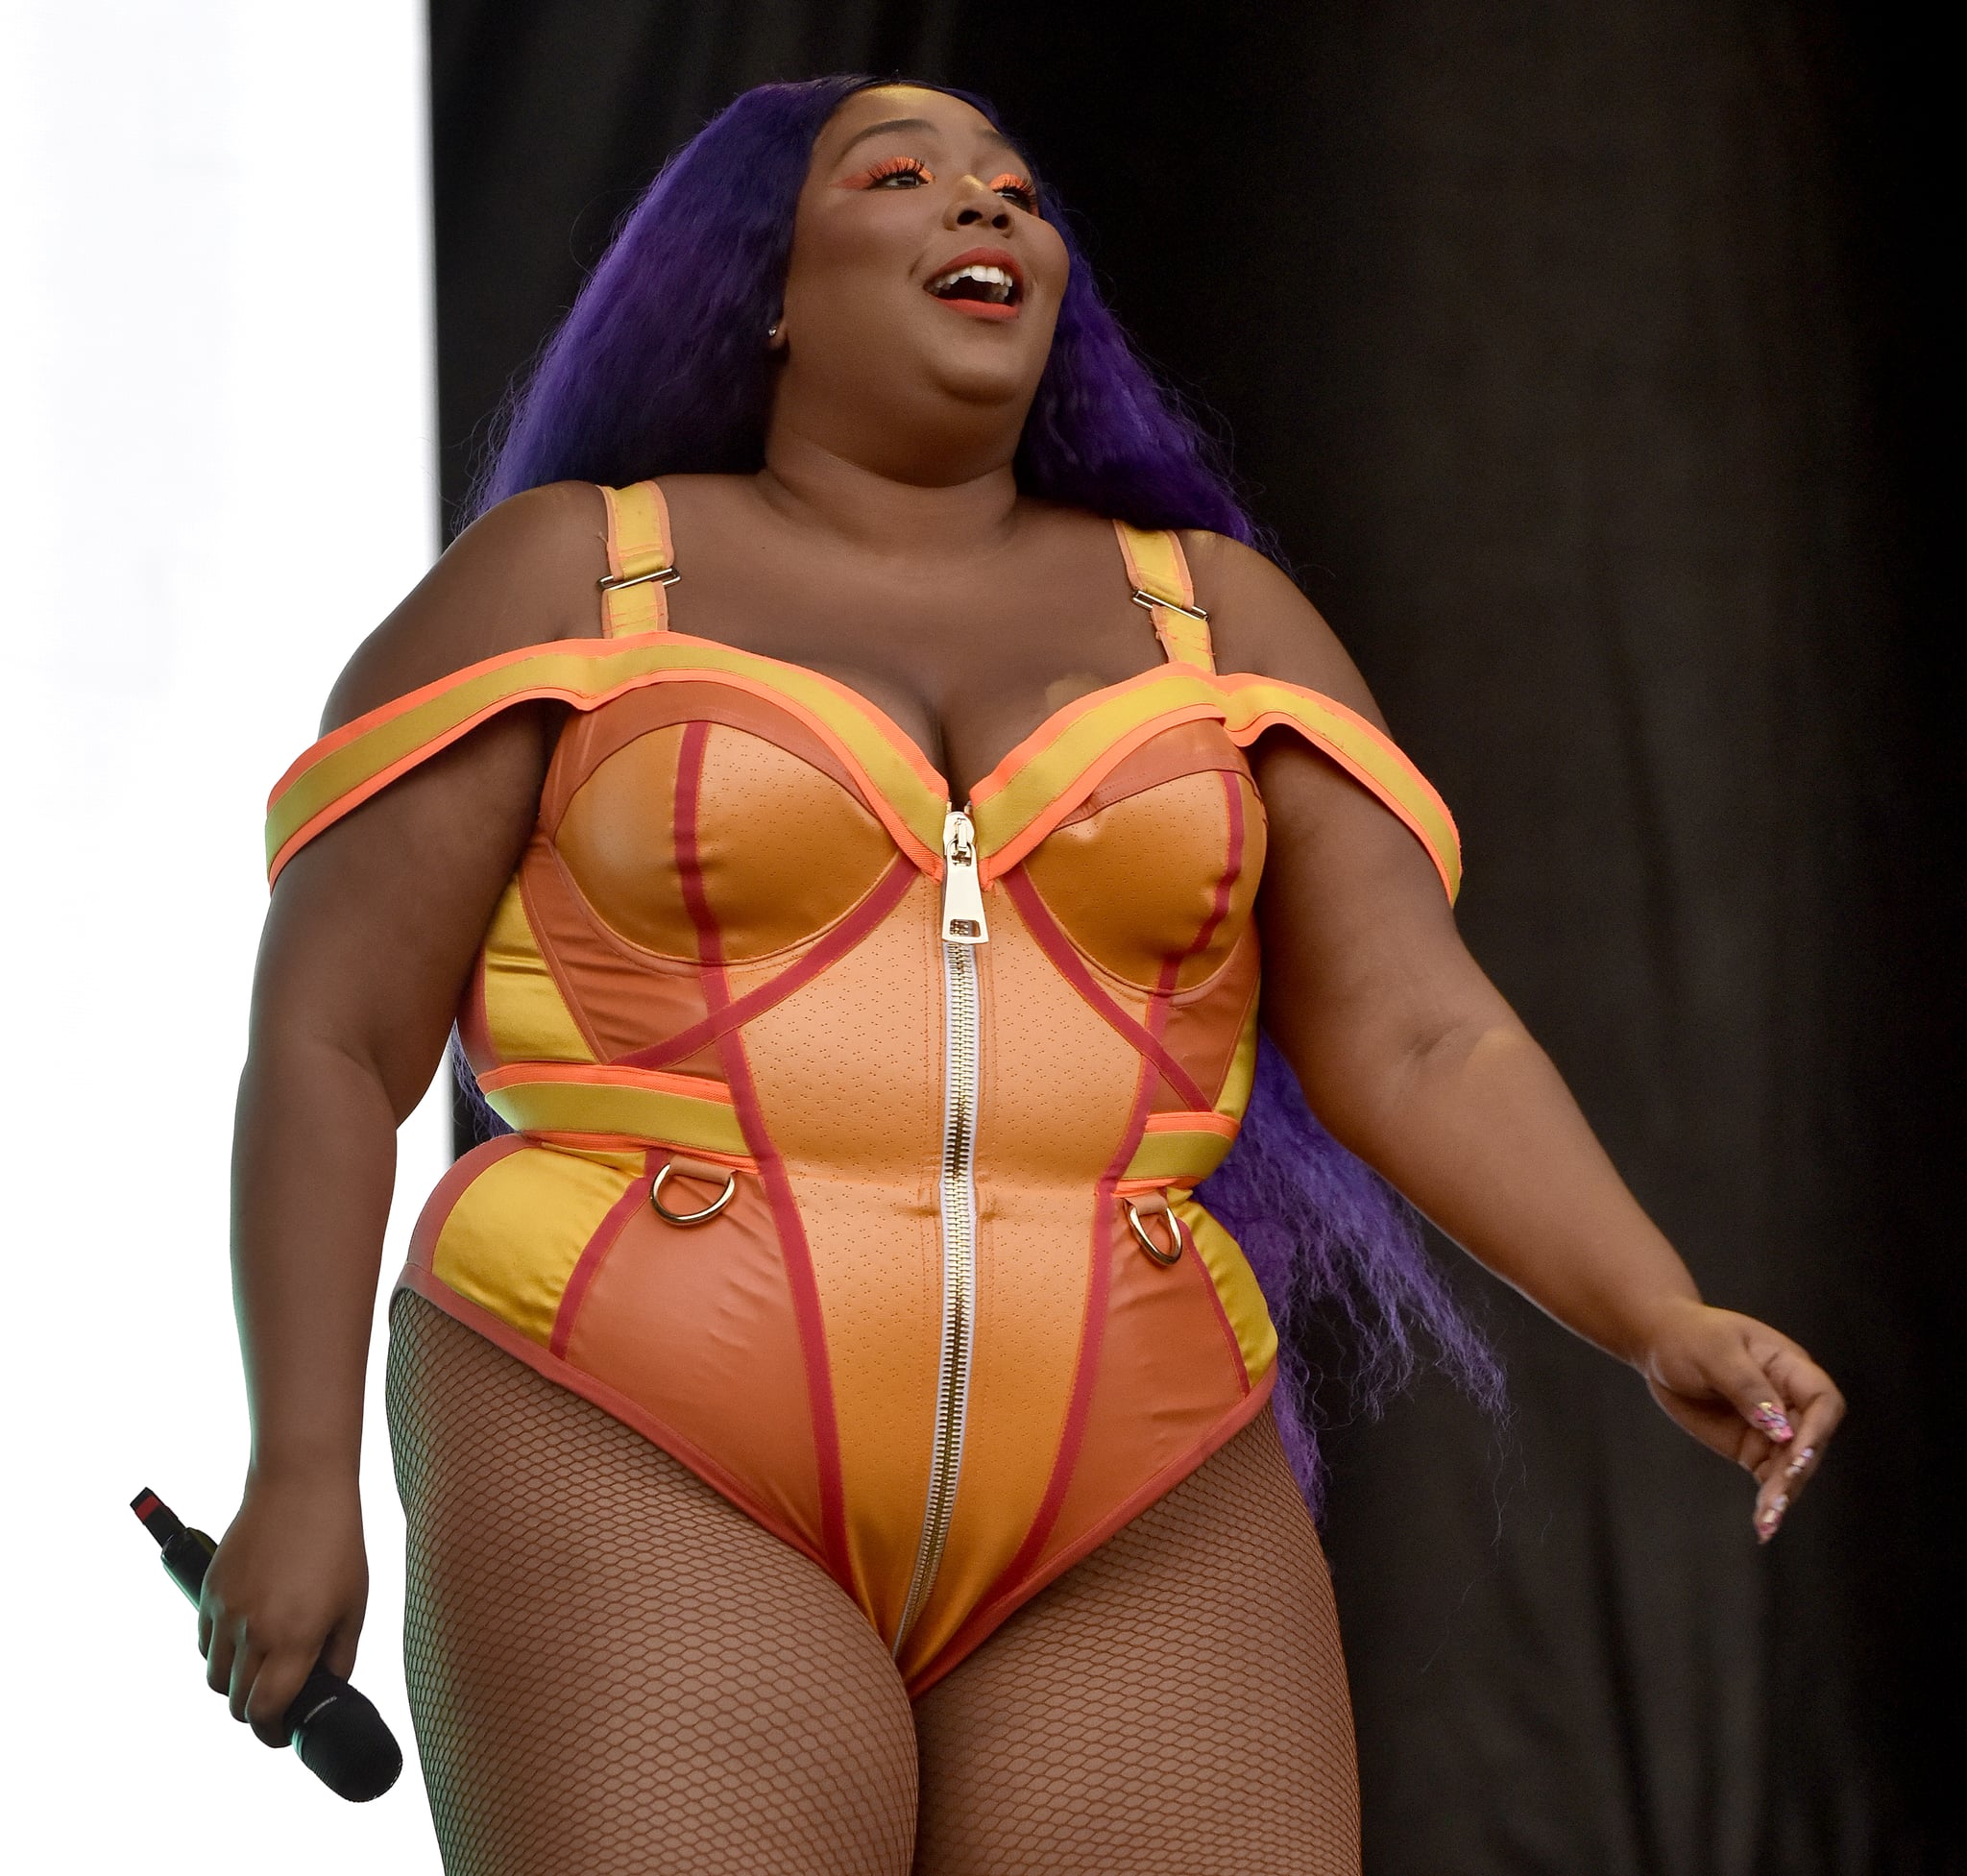 AUSTIN, TEXAS - OCTOBER 06: Lizzo performs during the ACL Music Festival 2019 at Zilker Park on October 06, 2019 in Austin, Texas. (Photo by Tim Mosenfelder/FilmMagic)